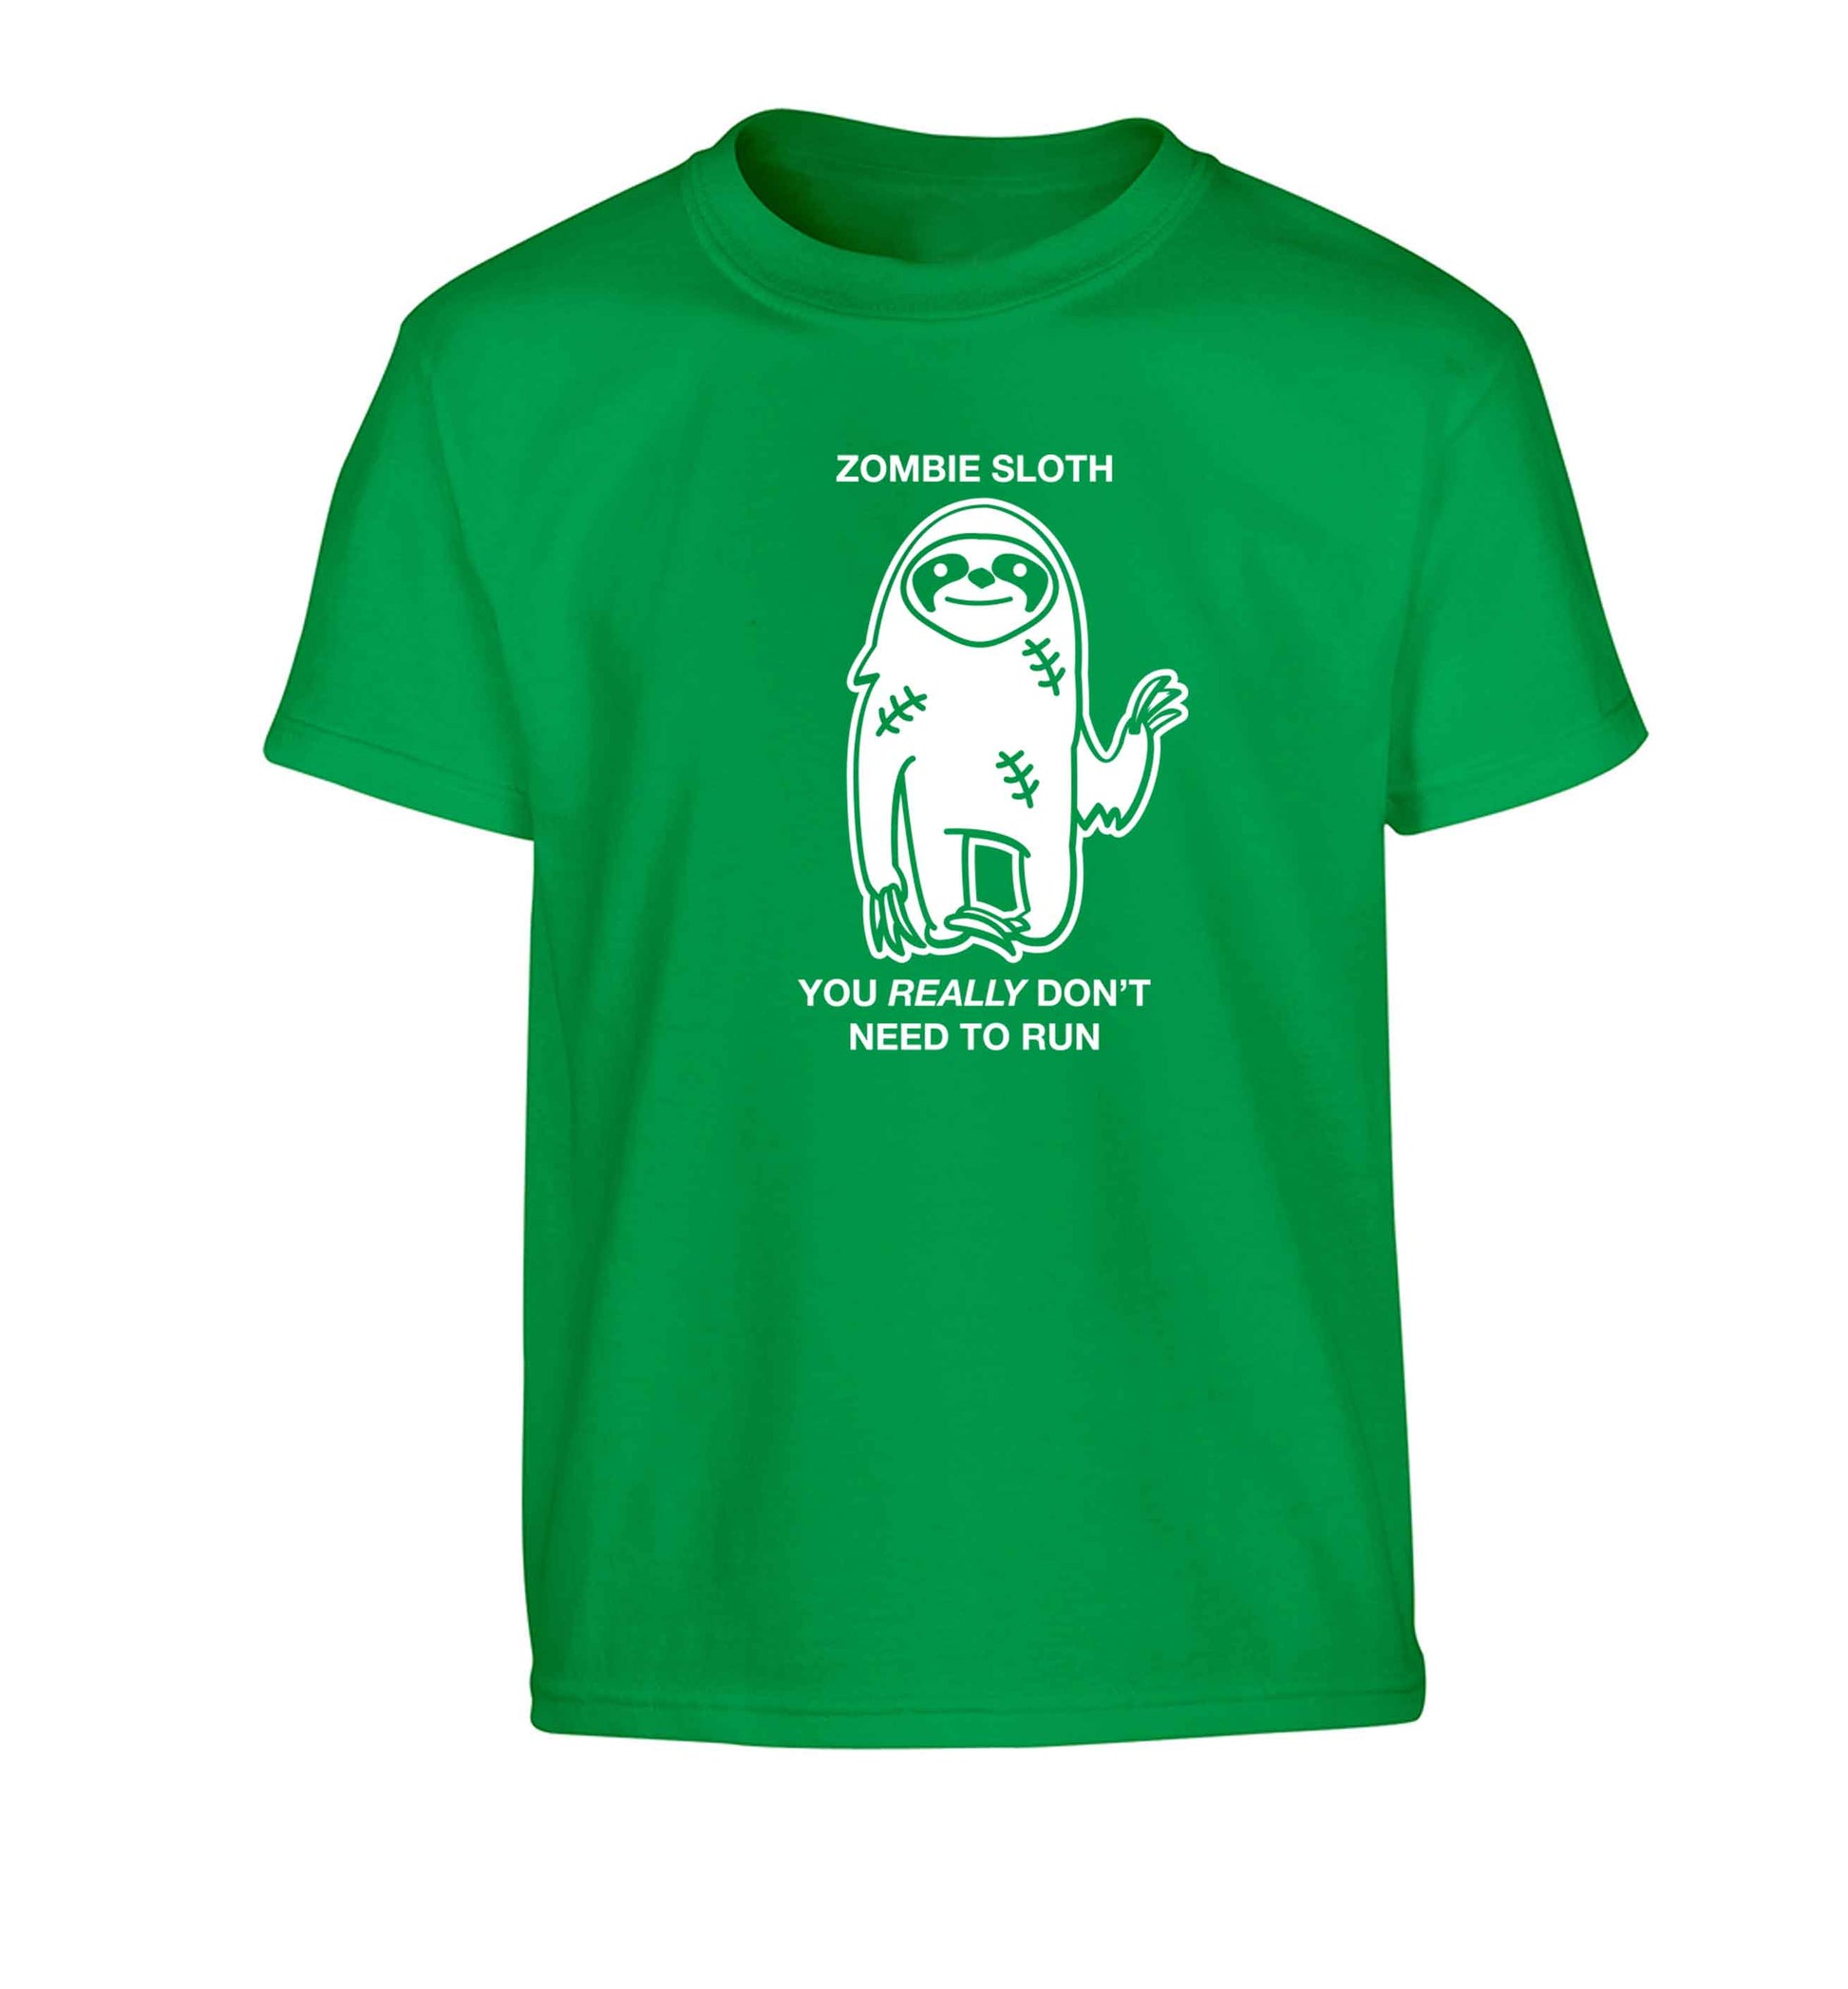 Zombie sloth you really don't need to run Children's green Tshirt 12-13 Years